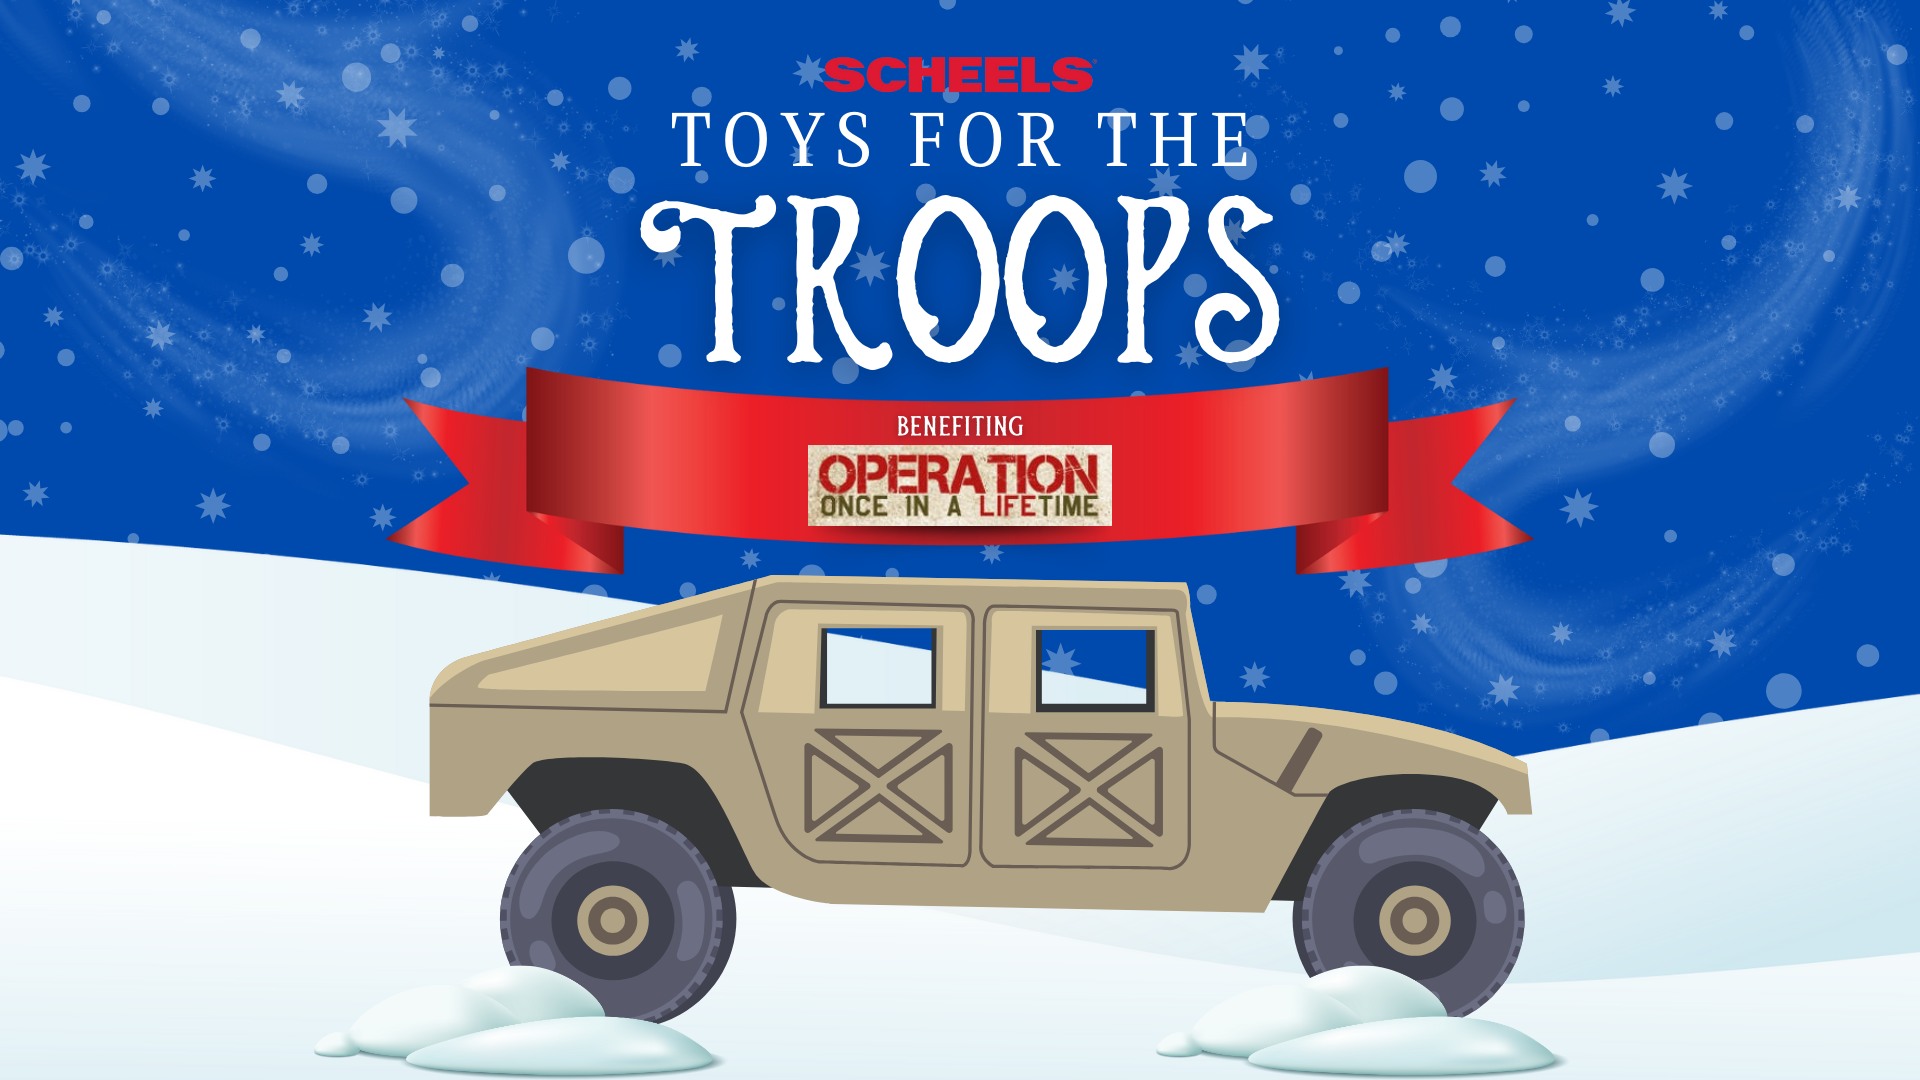 Toys for Troops